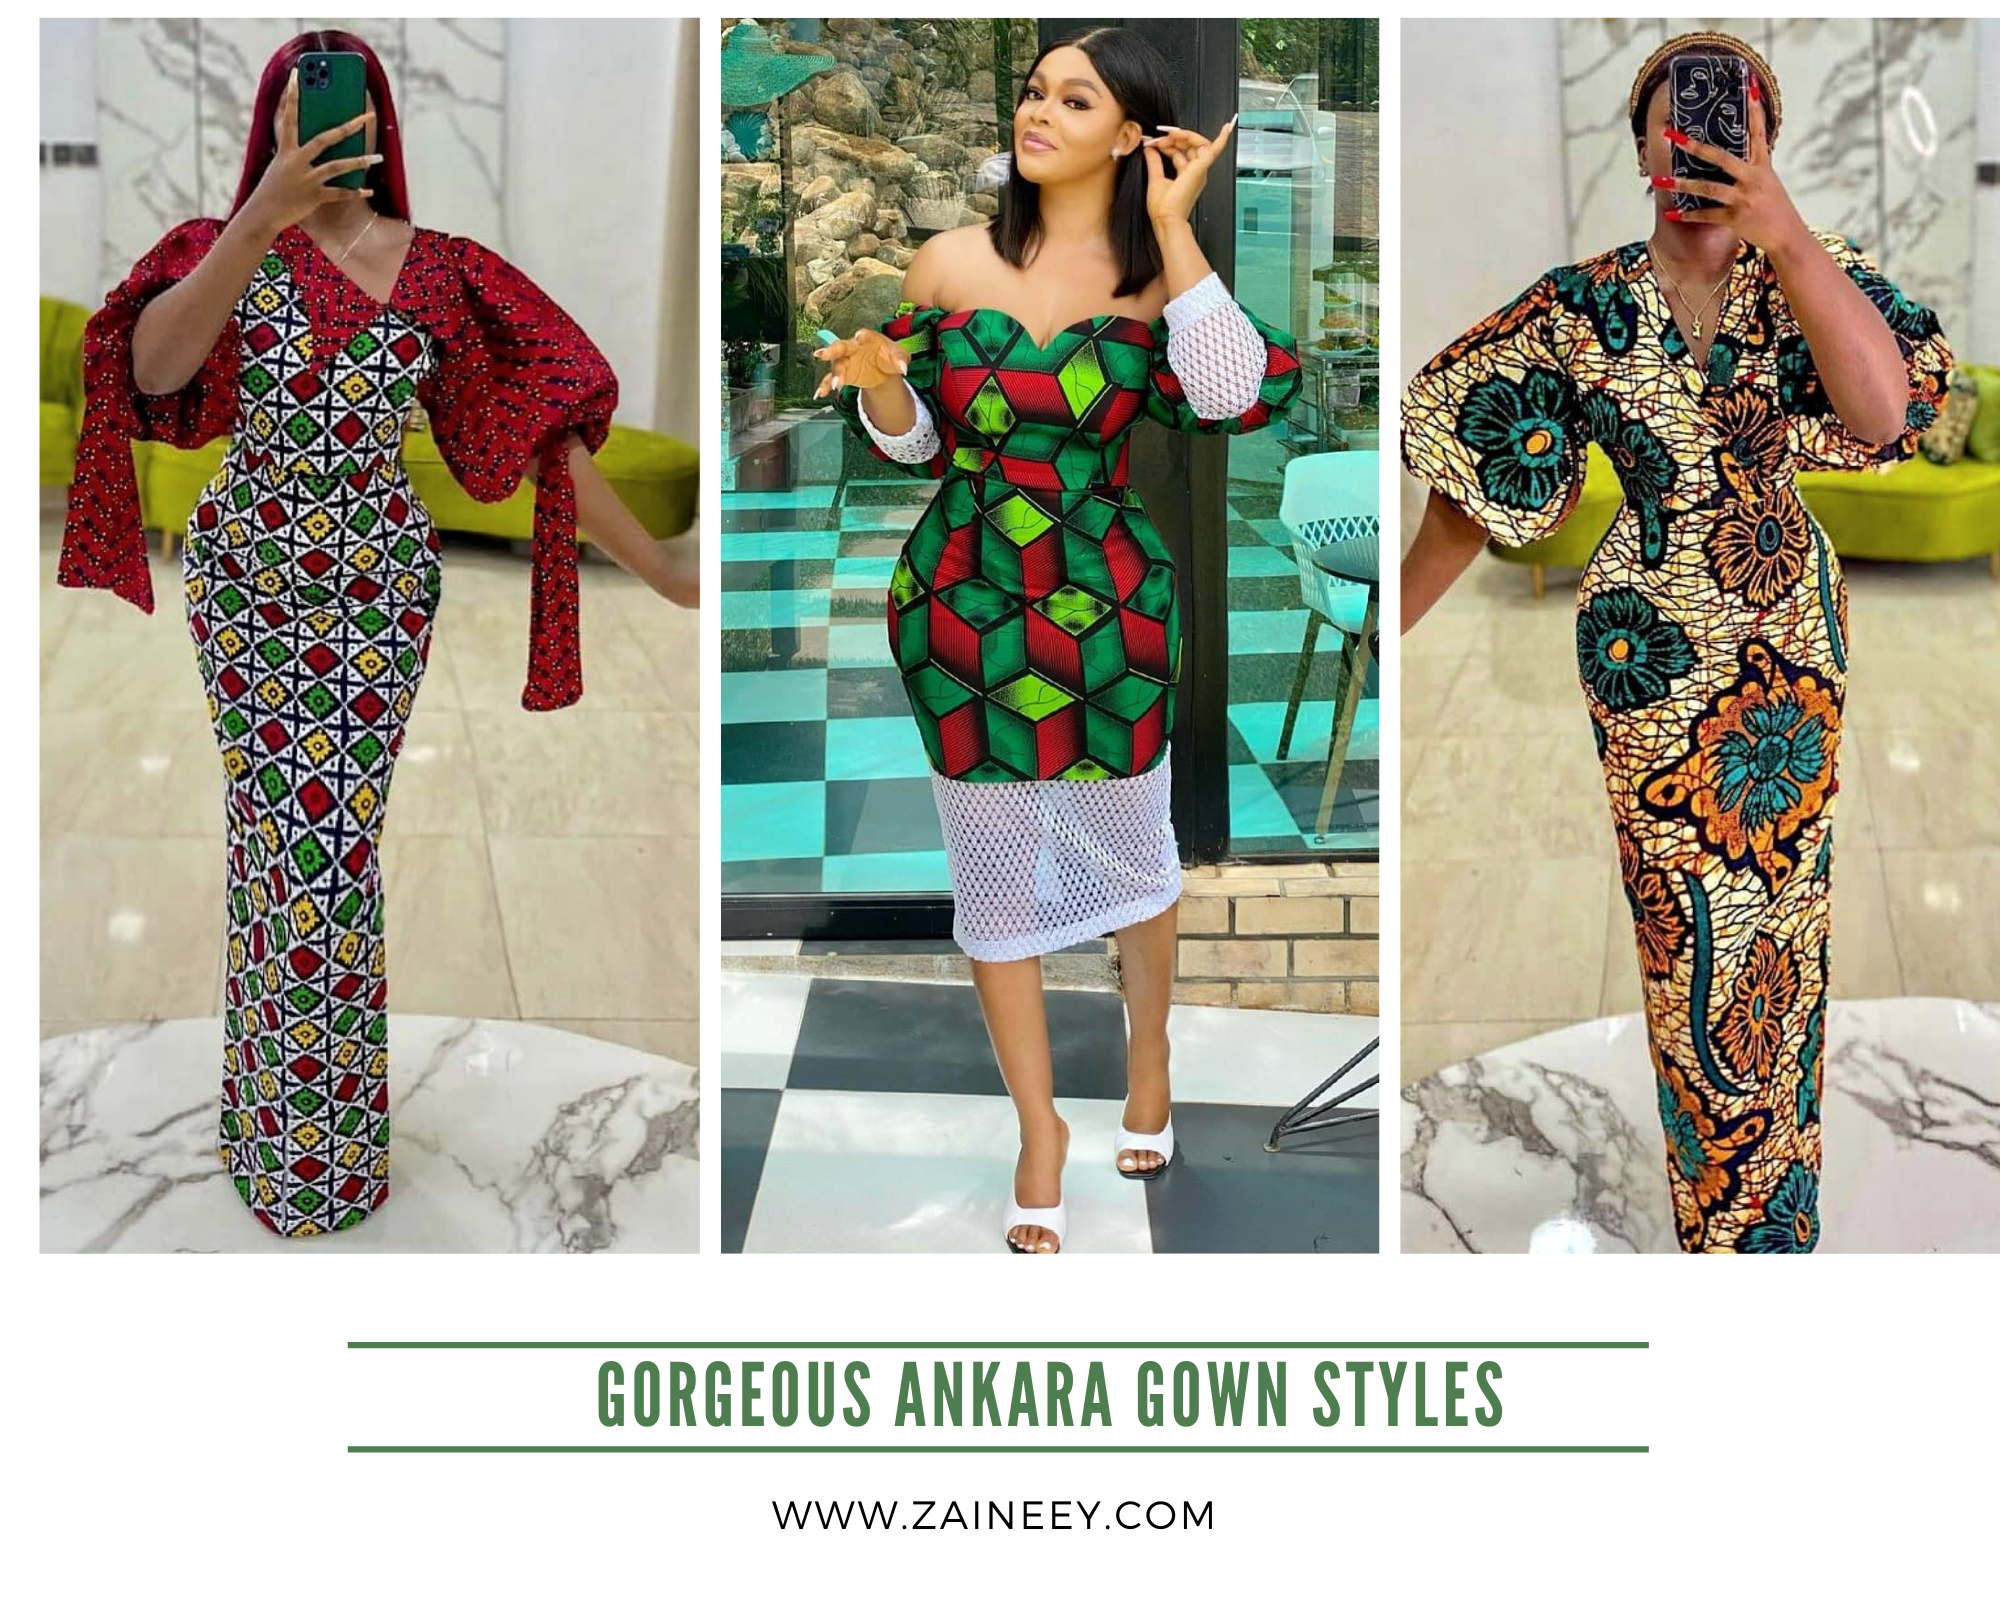 Latest, Stunning and Gorgeous Ankara Gown Styles